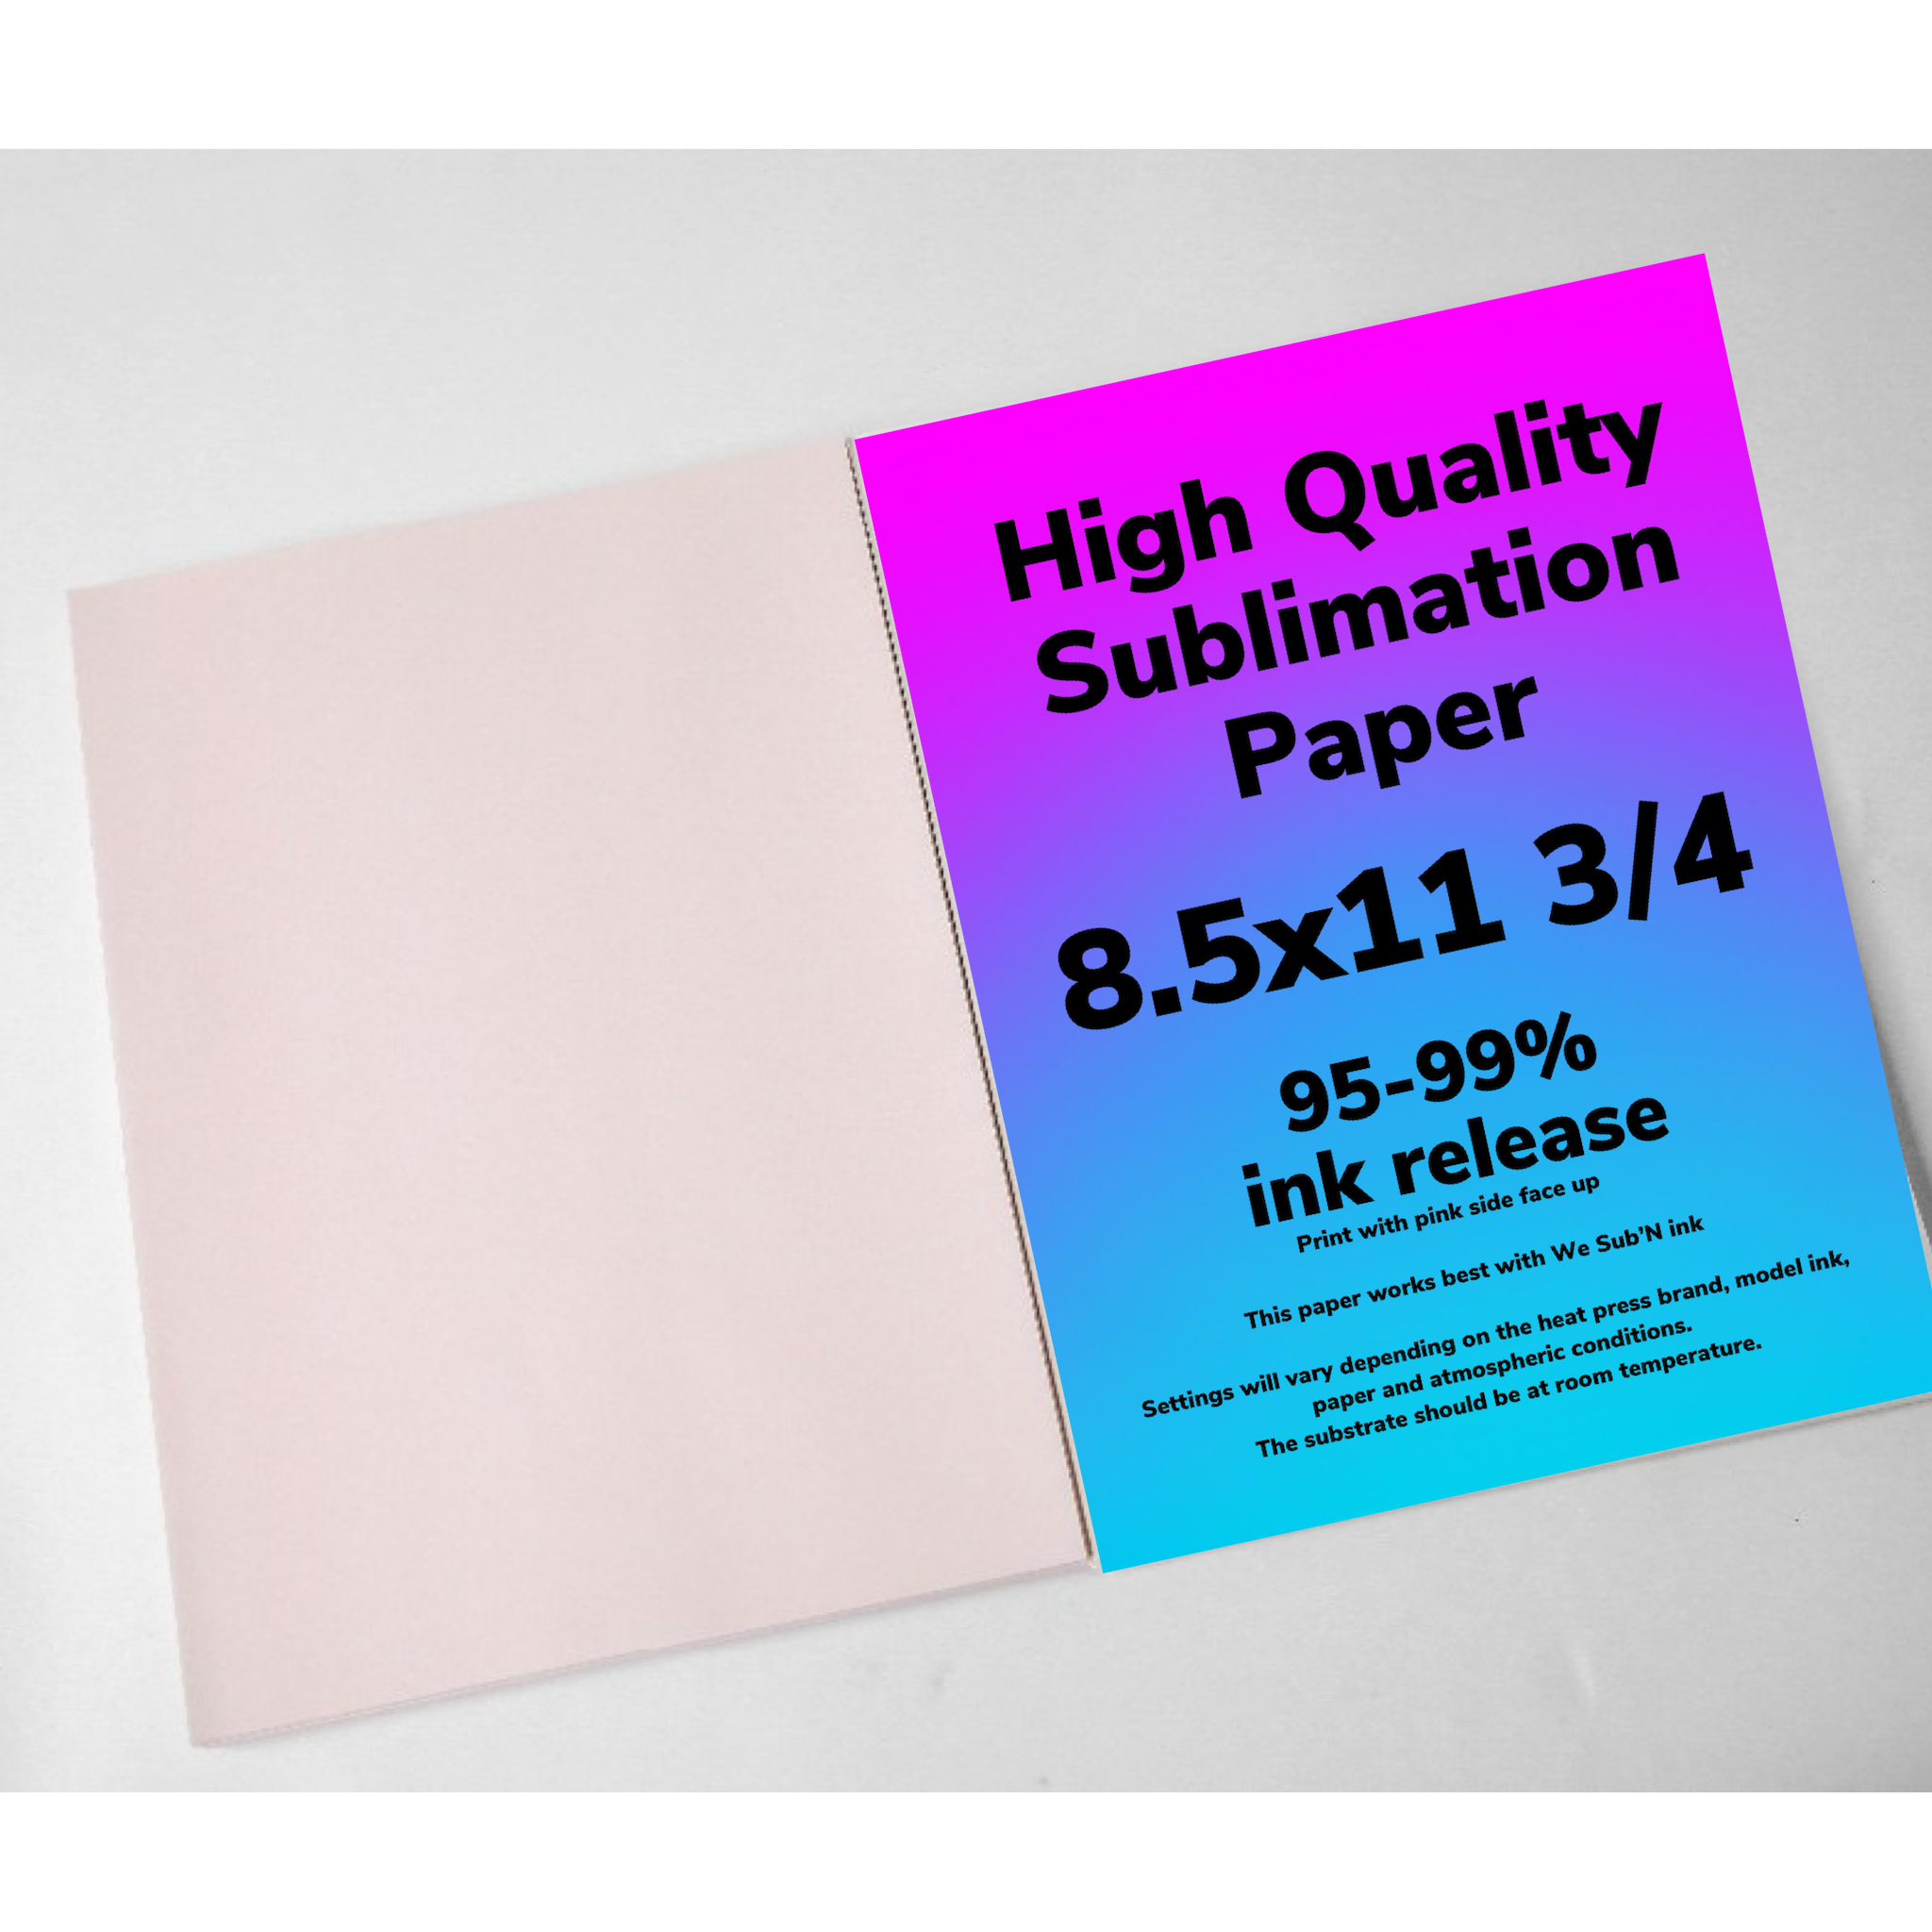 A-SUB Dye Sublimation Paper 11x17 for Inkjet Heat Transfer Cotton Poly 50  Sheets